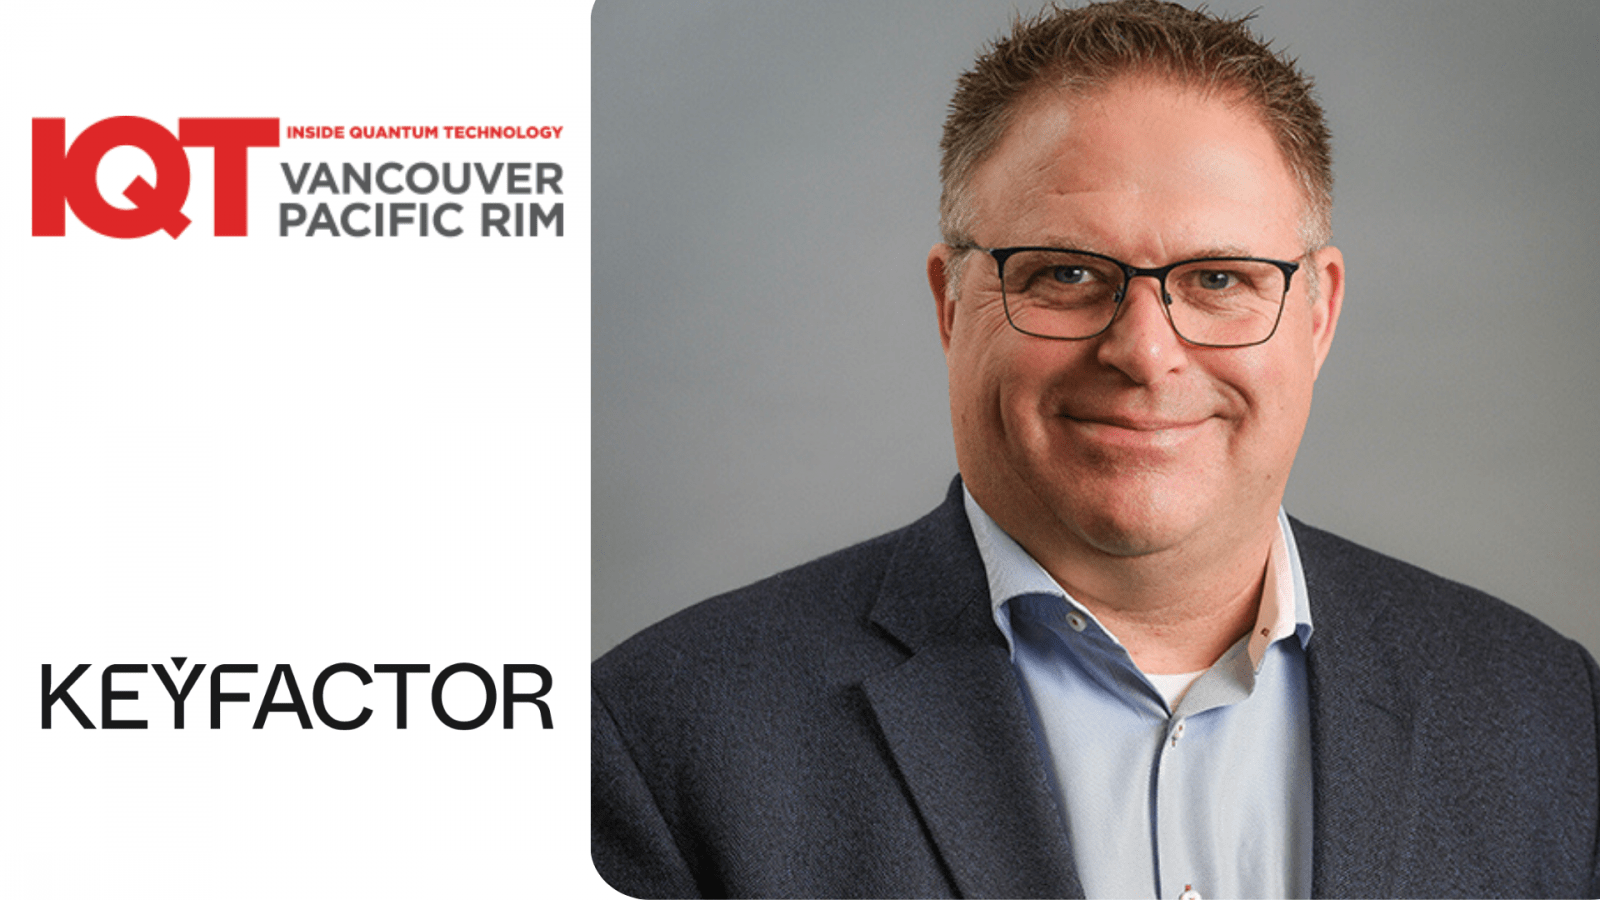 Chris Hickman CSO of Keyfactor, is a 2024 Speaker at the IQT Vancouver/Pacific Rim Conference in June